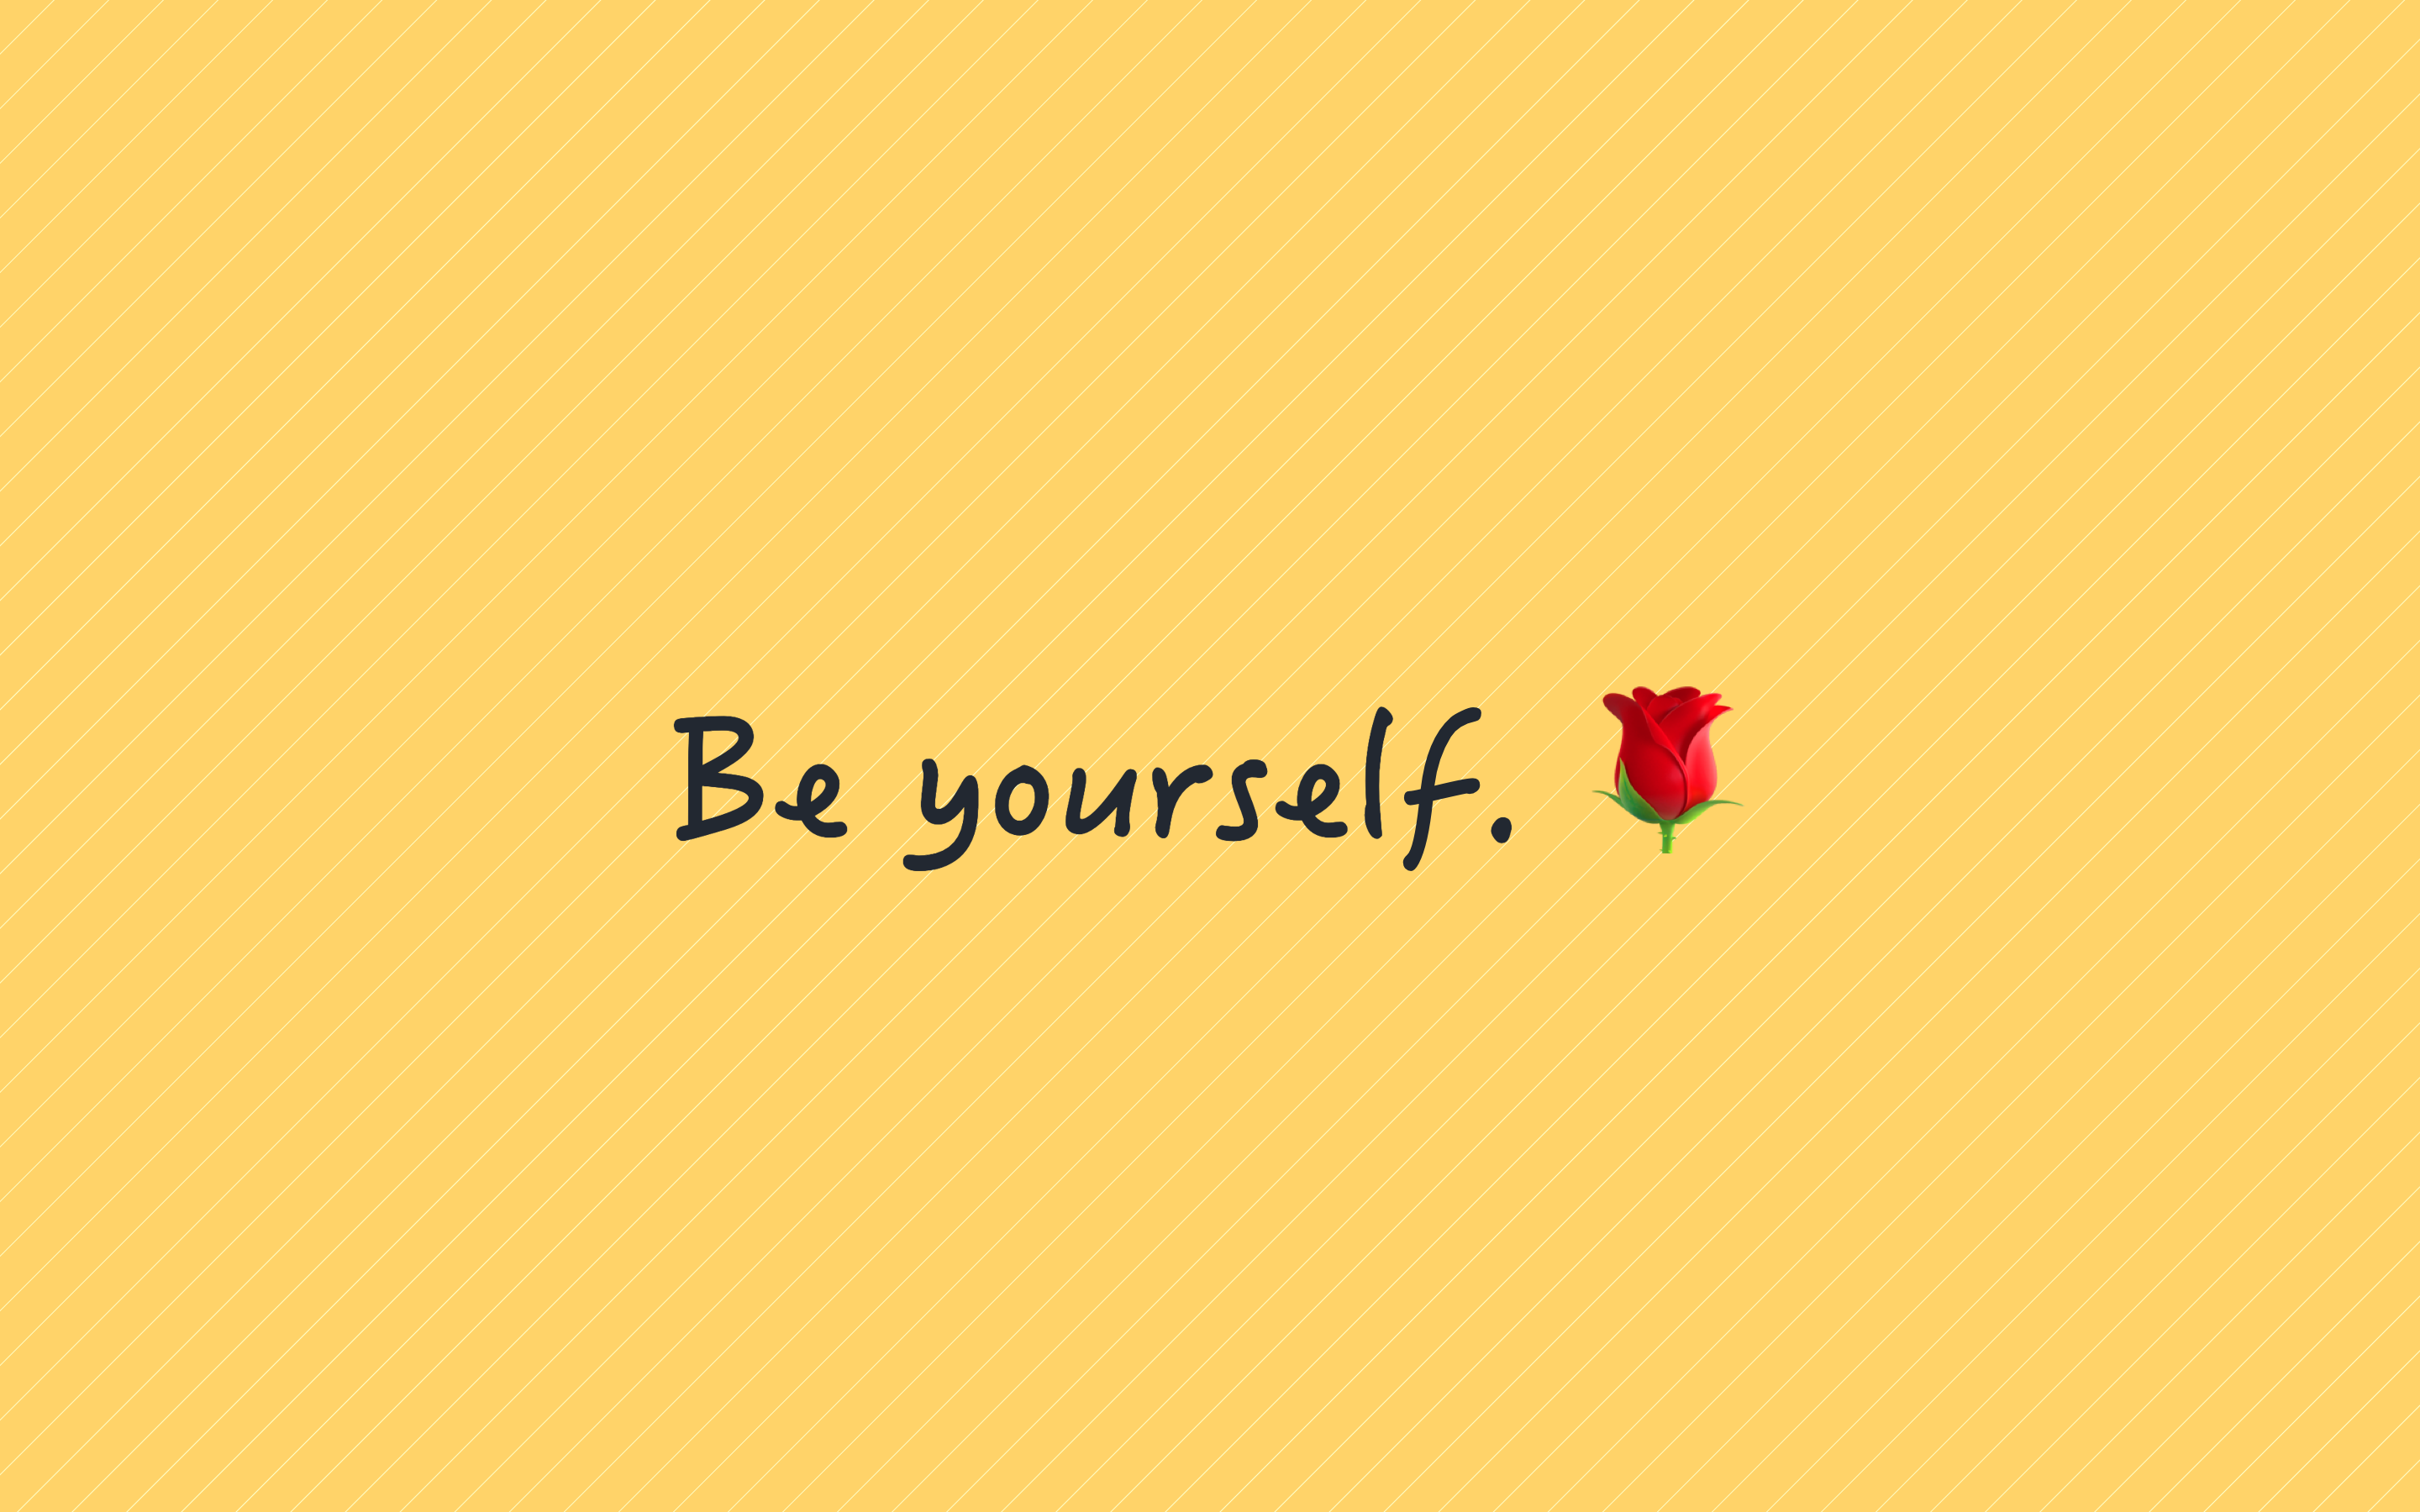 be your self